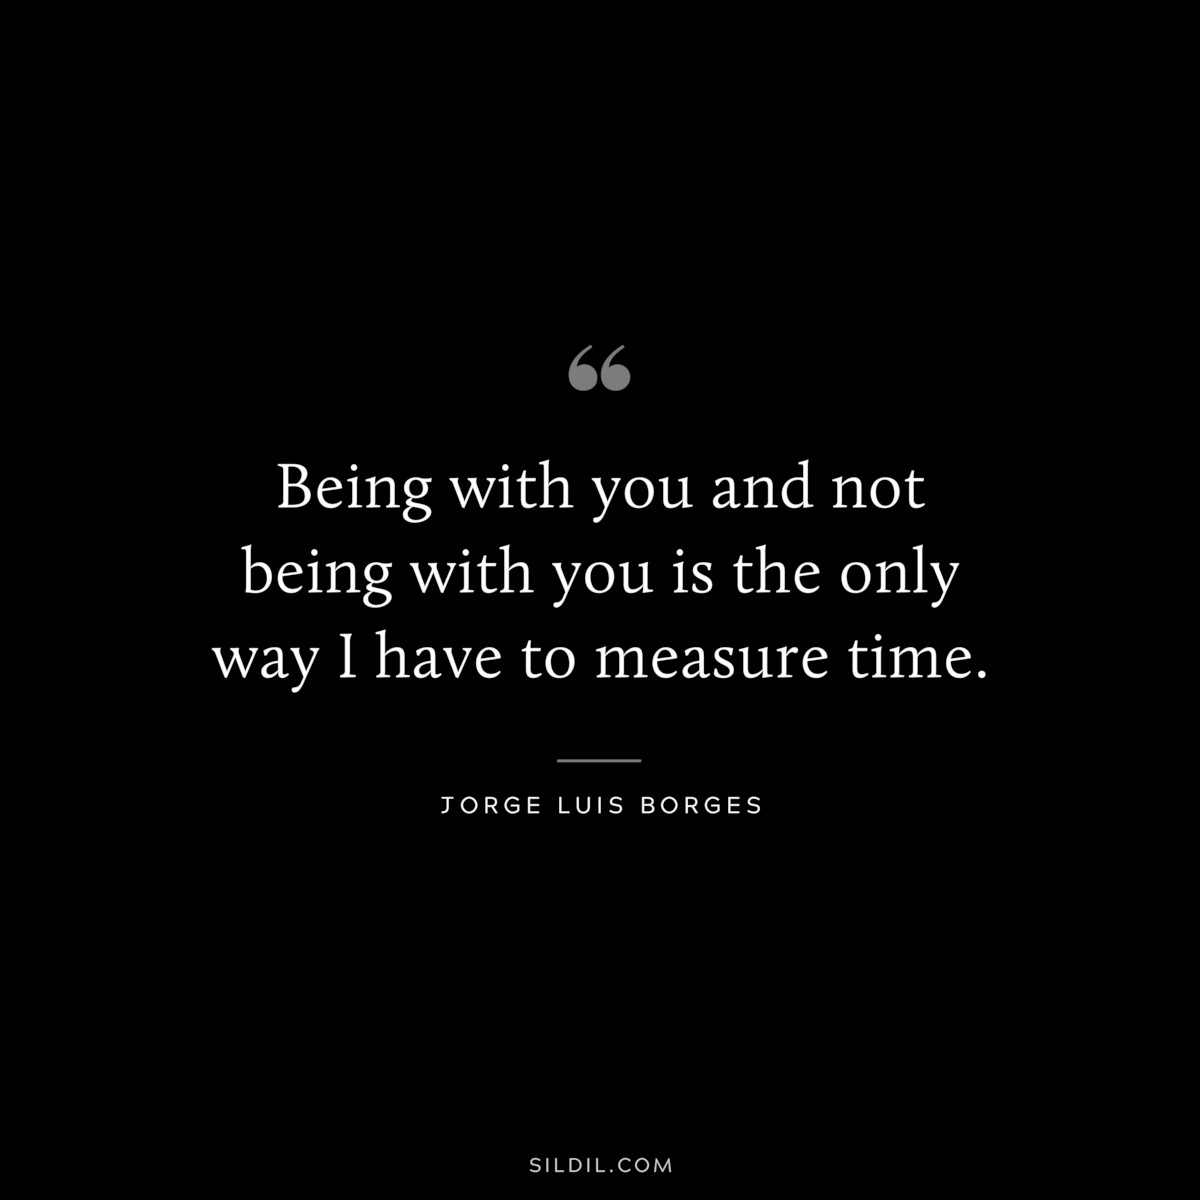 Being with you and not being with you is the only way I have to measure time. ― Jorge Luis Borges